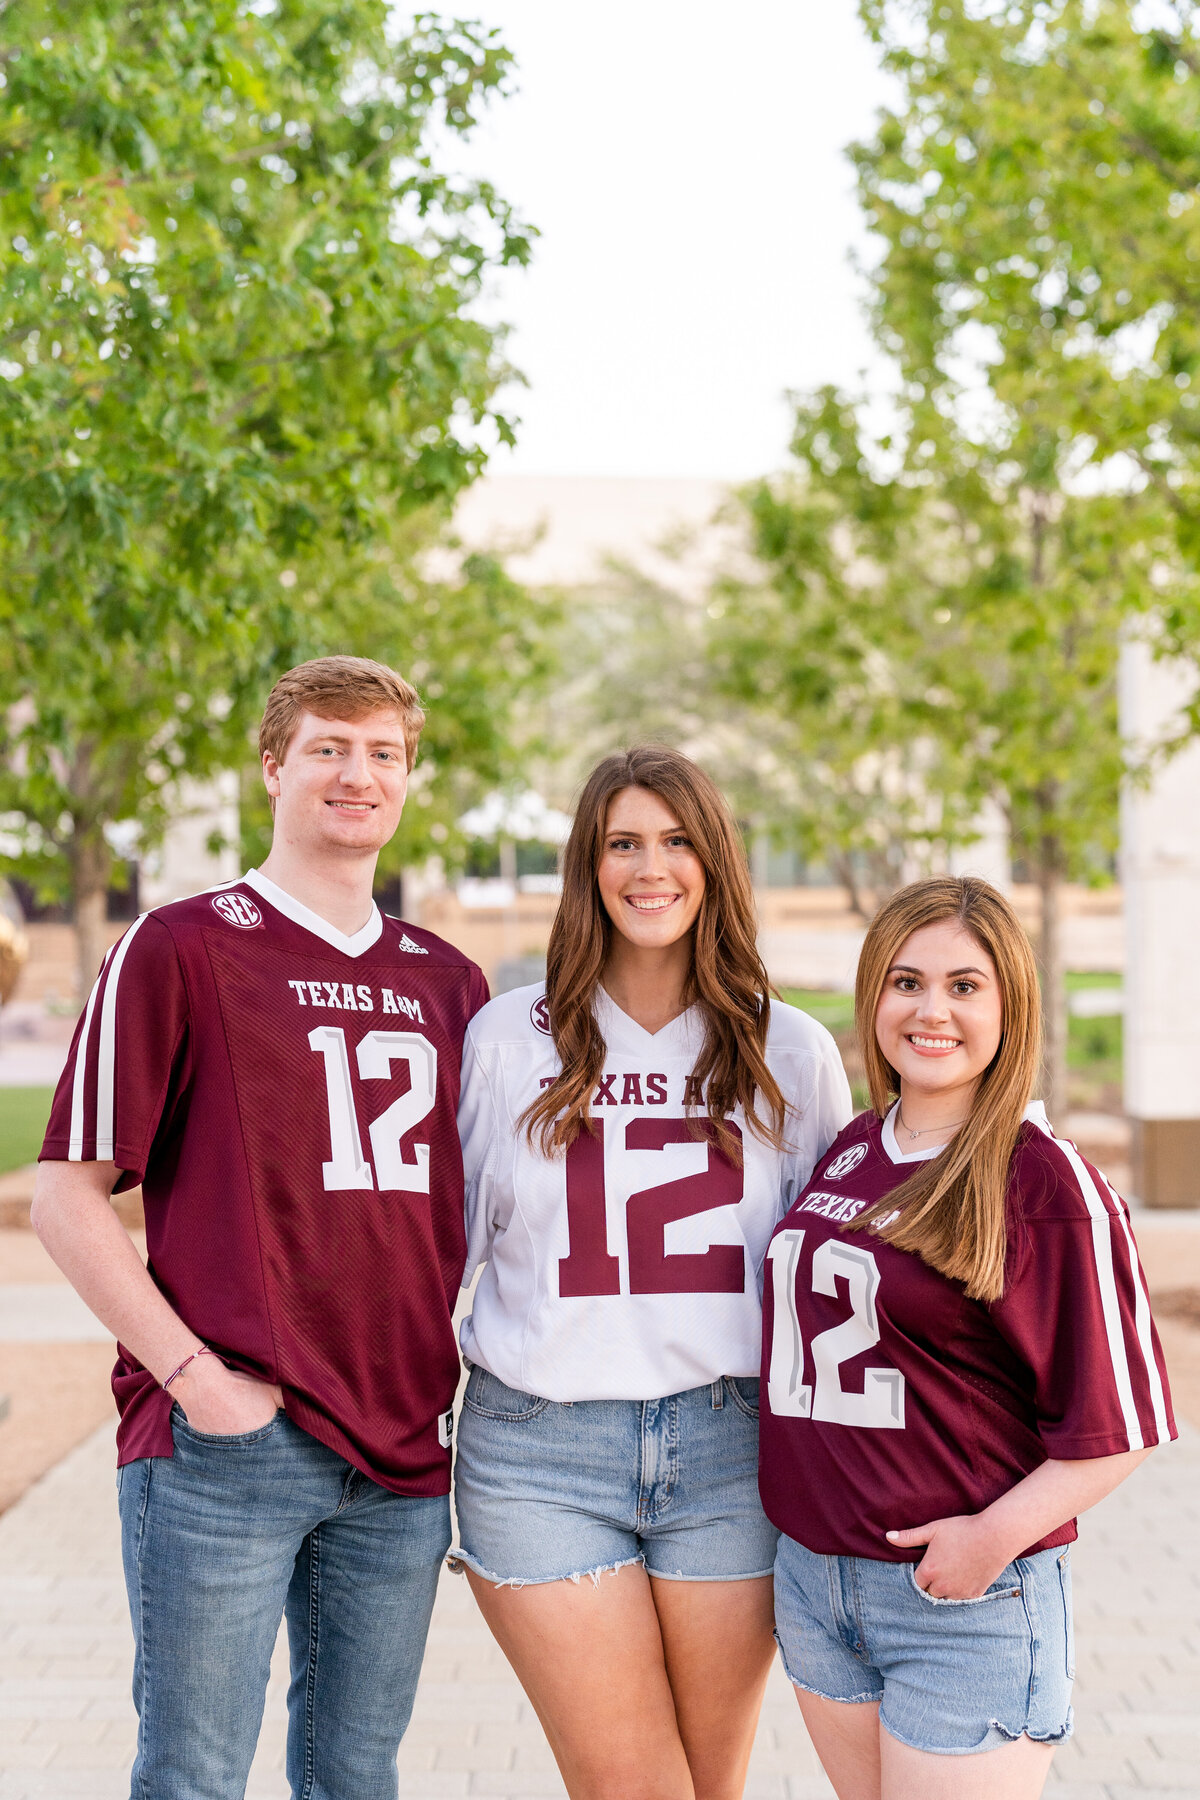 Texas A&M senior friends with arms around each other while wearing A&M jerseys and smiling in Aggie Park